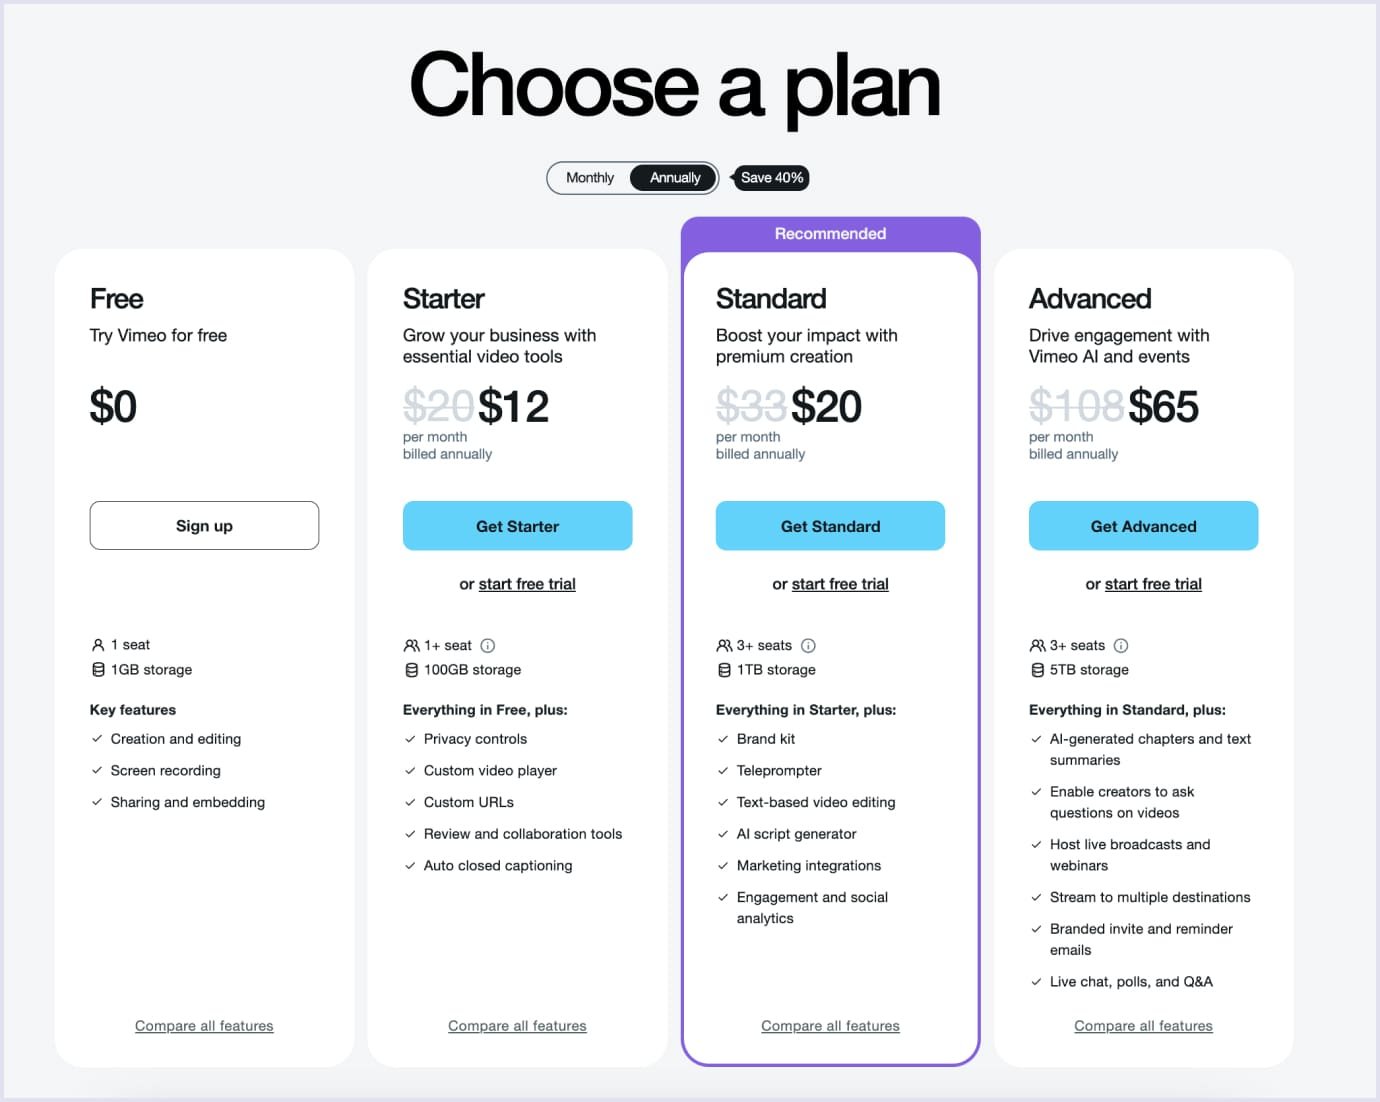 Hybrid pricing strategy for SaaS by Vimeo